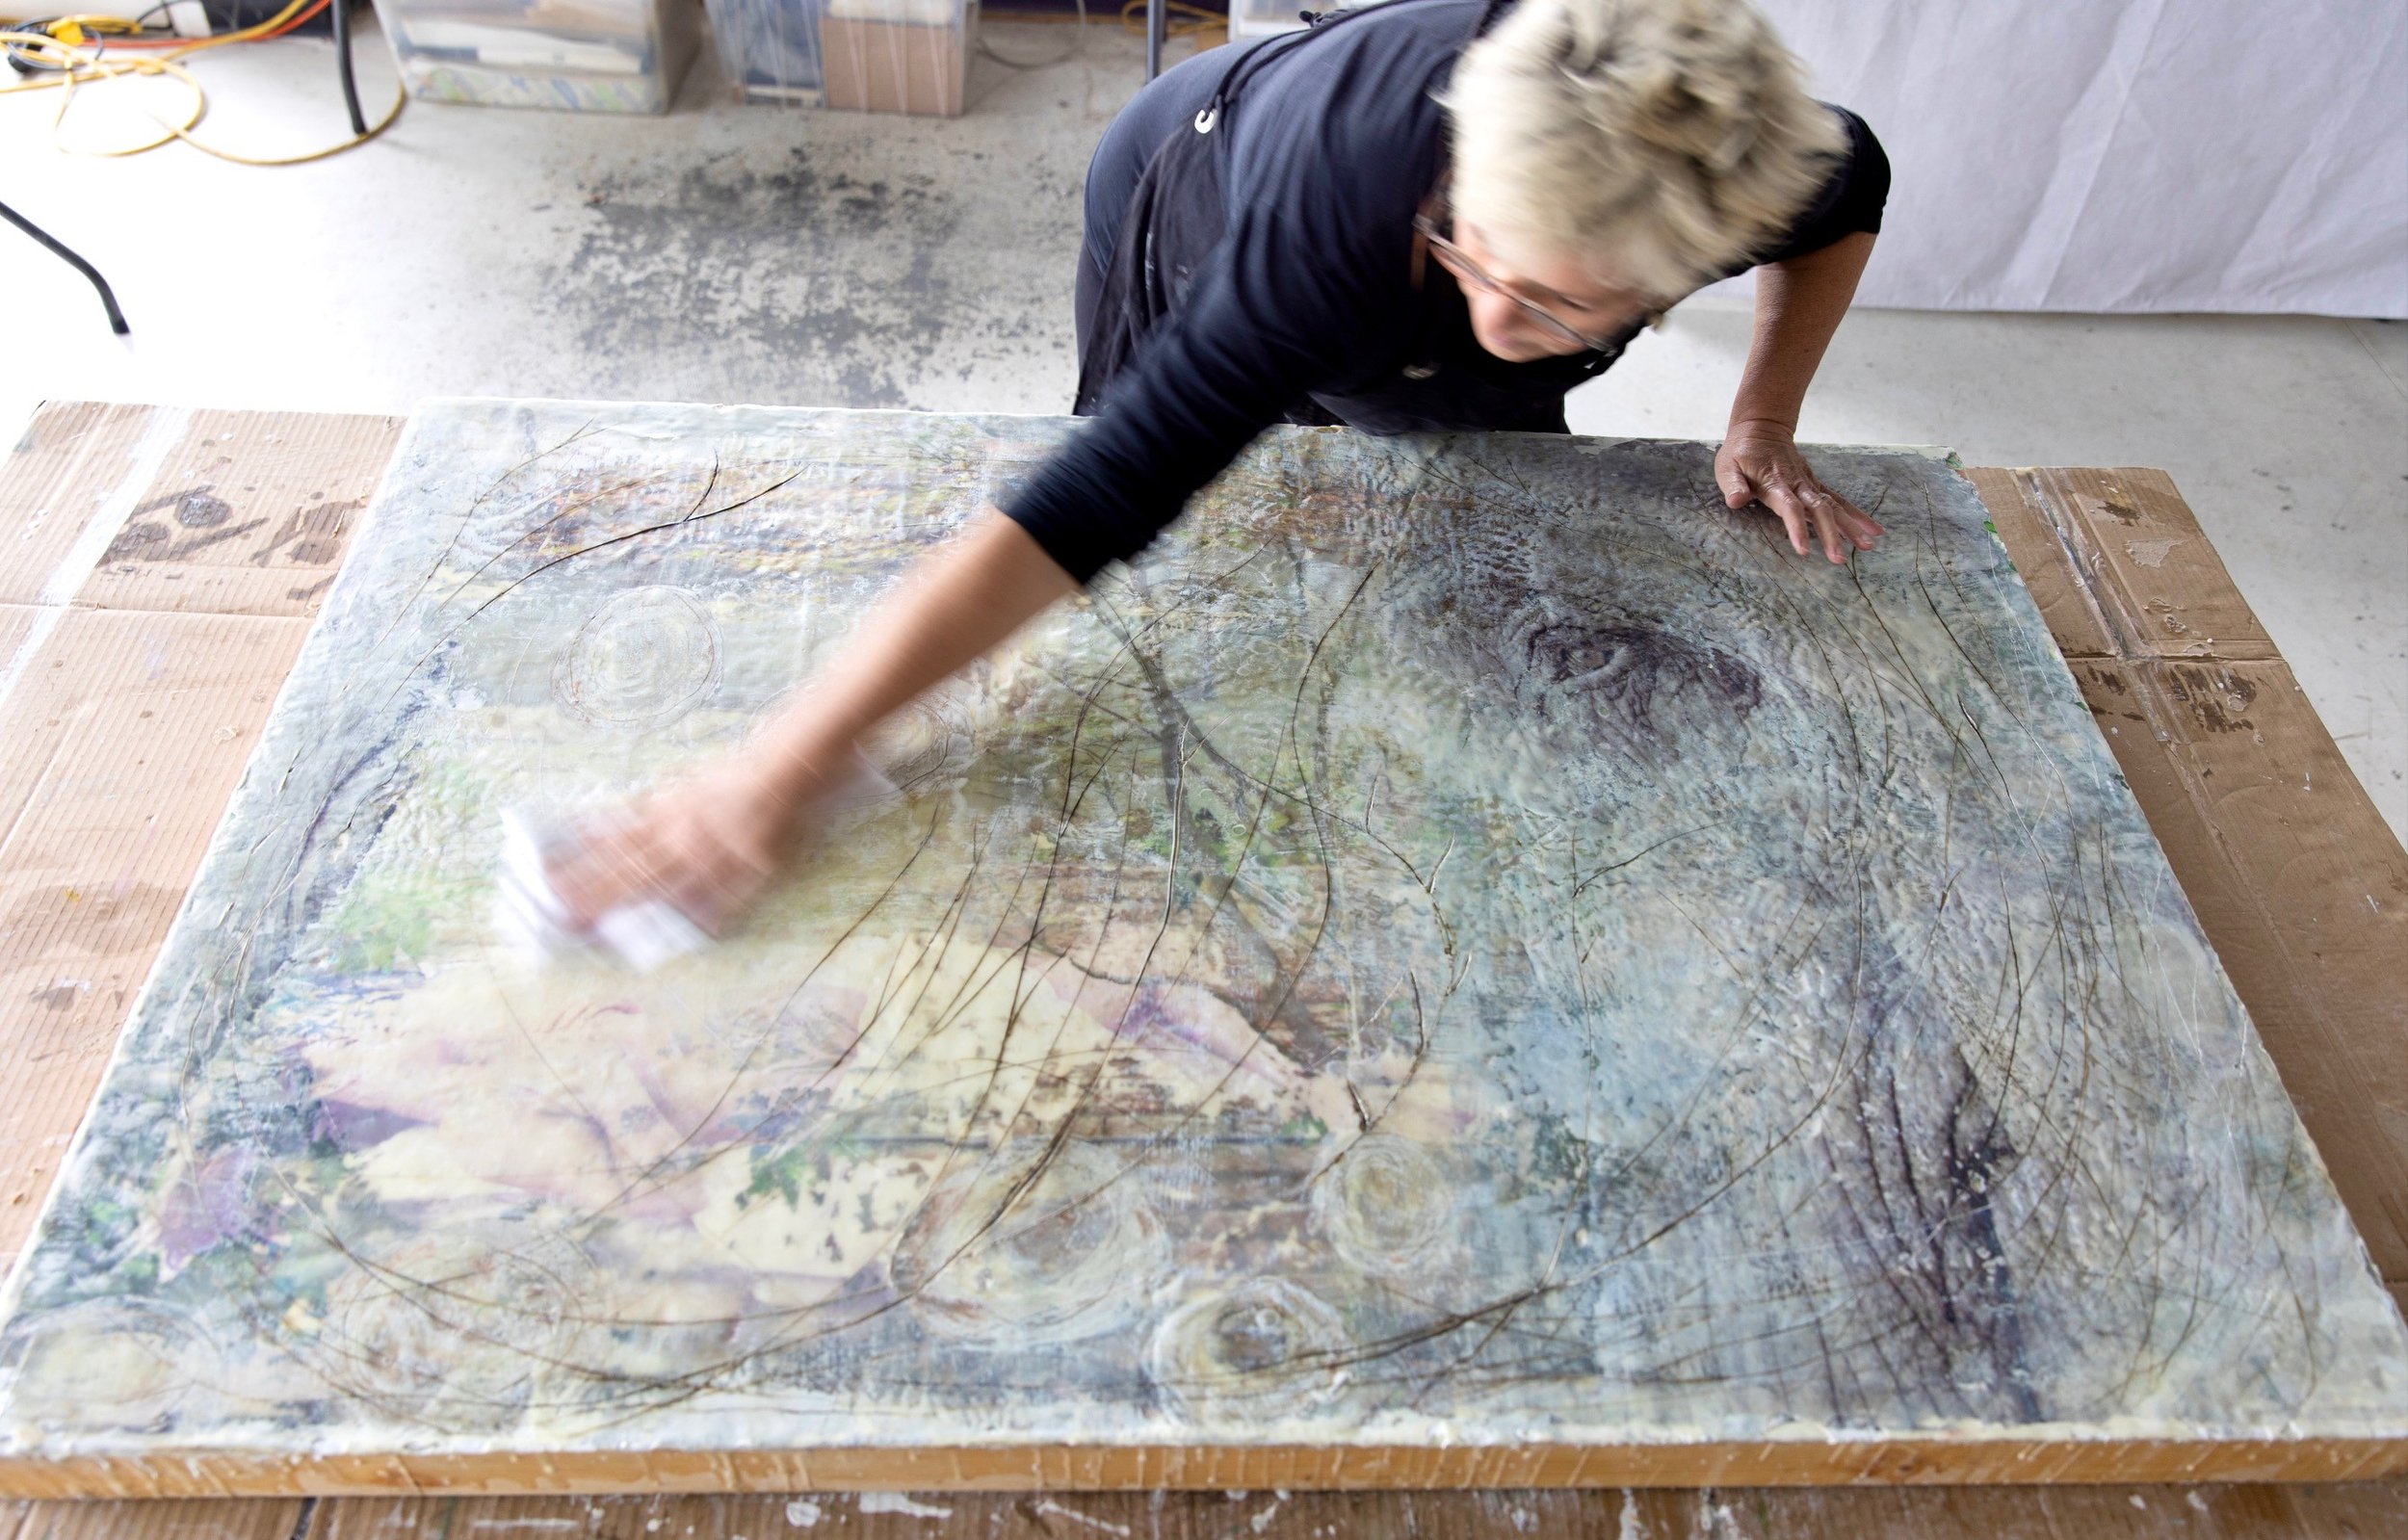 Heidi buffing a large painting.jpg